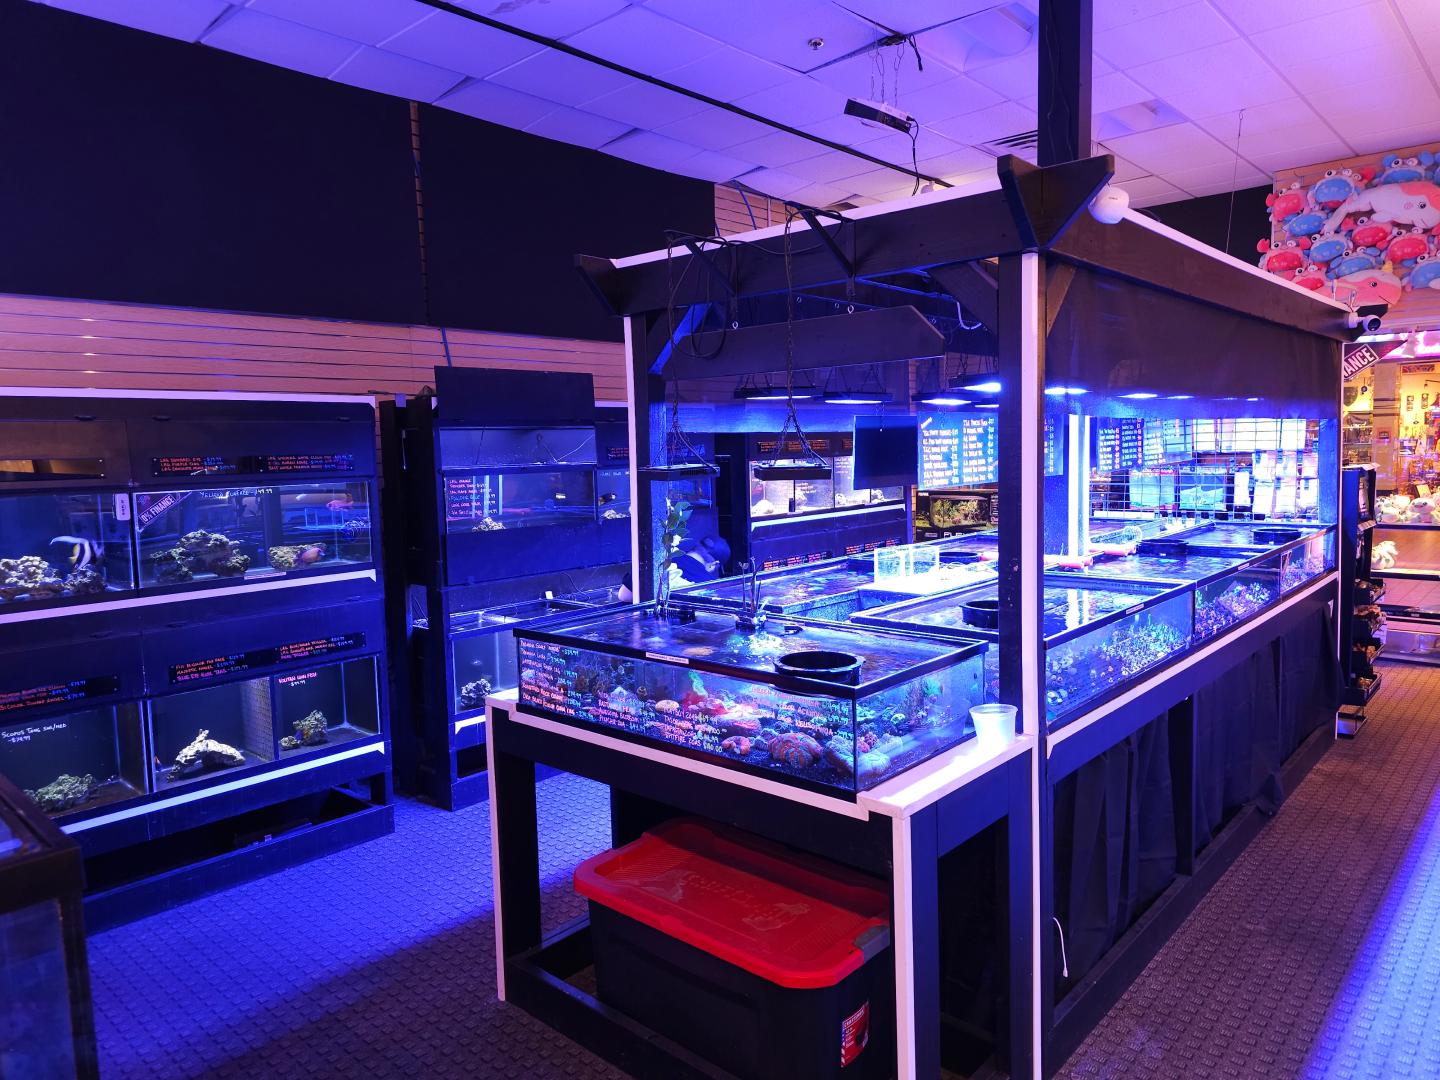 A large aquarium in a store with blue lights